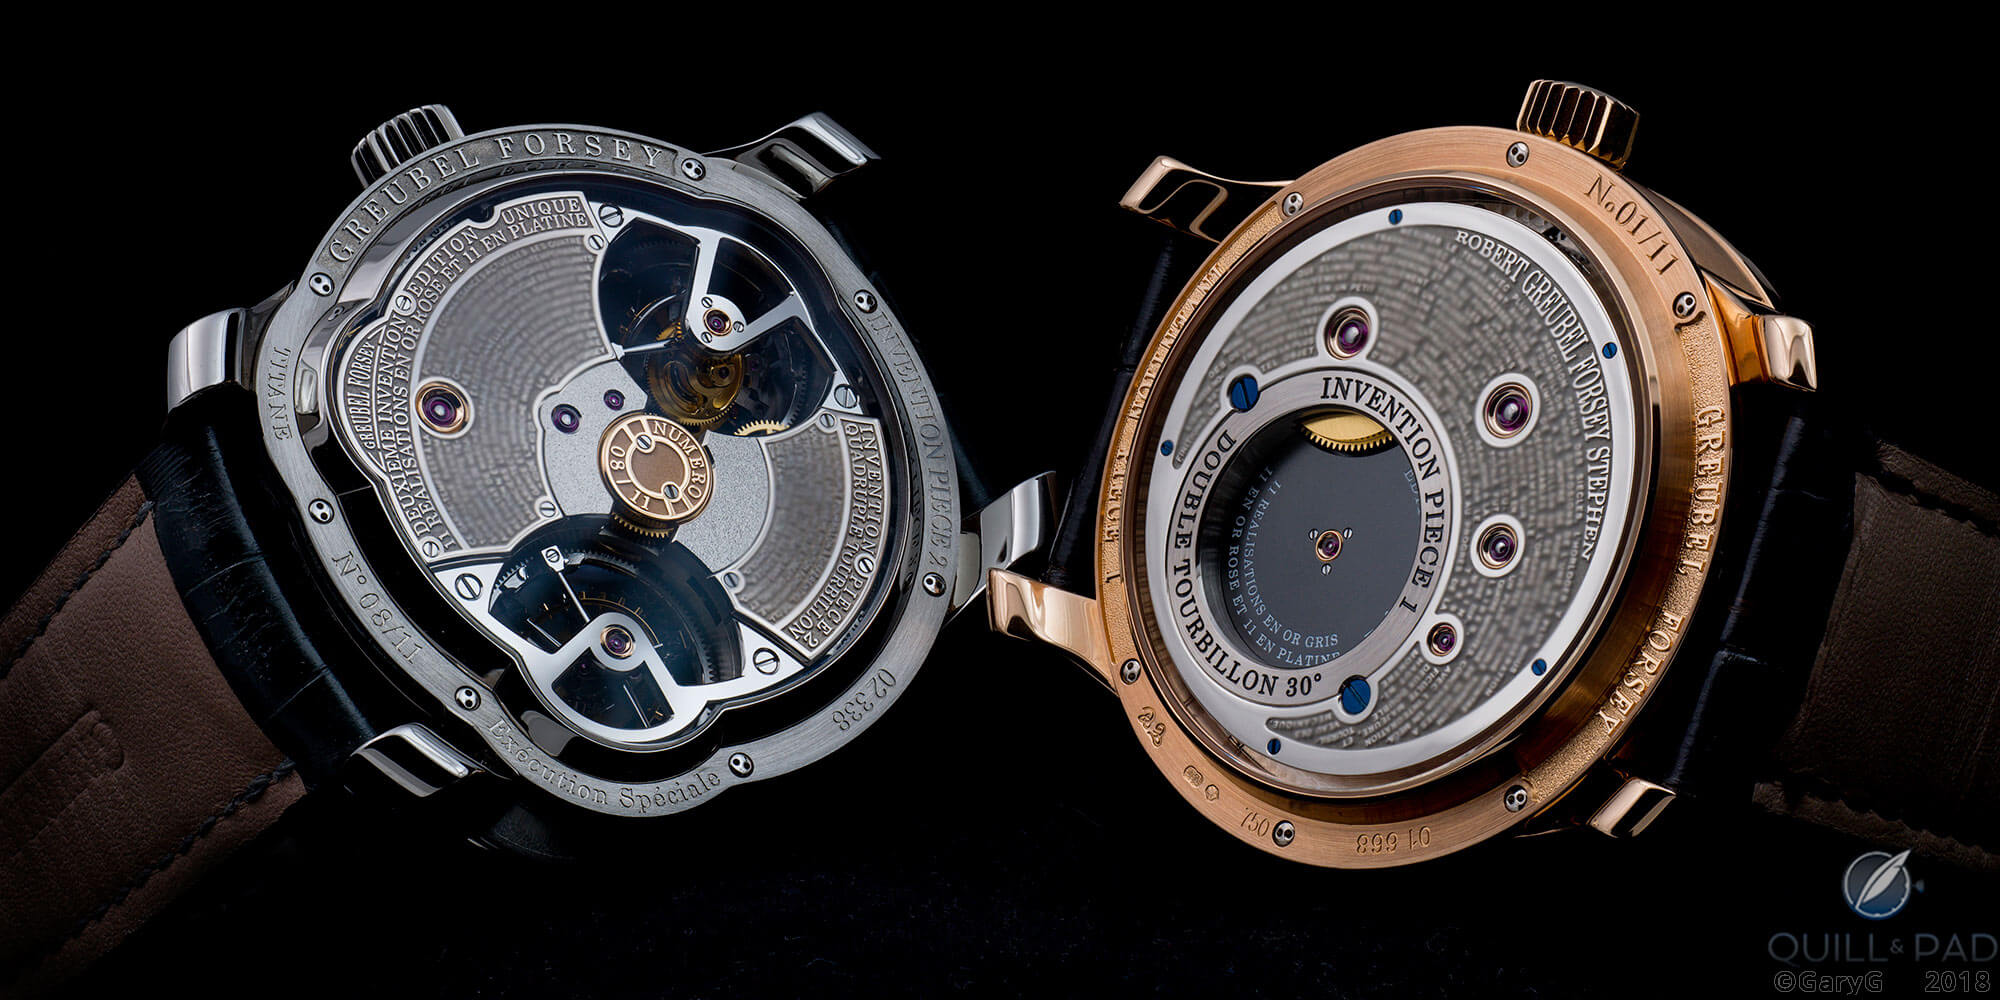 Back to back: Greubel Forsey Invention Pieces 2 (at left) and 1